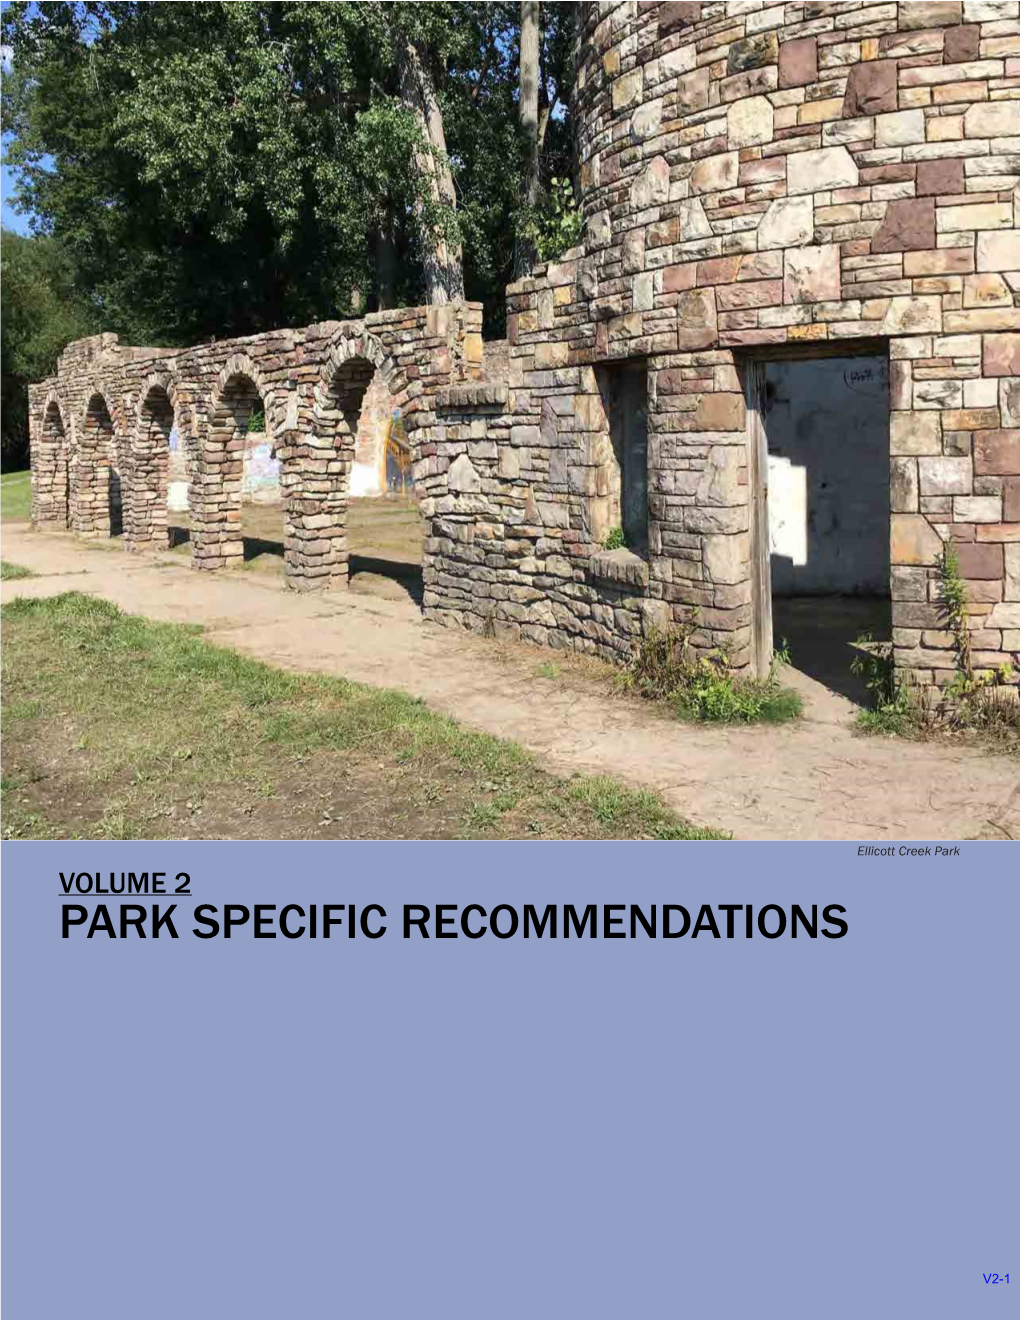 Volume 2 Park Specific Recommendations